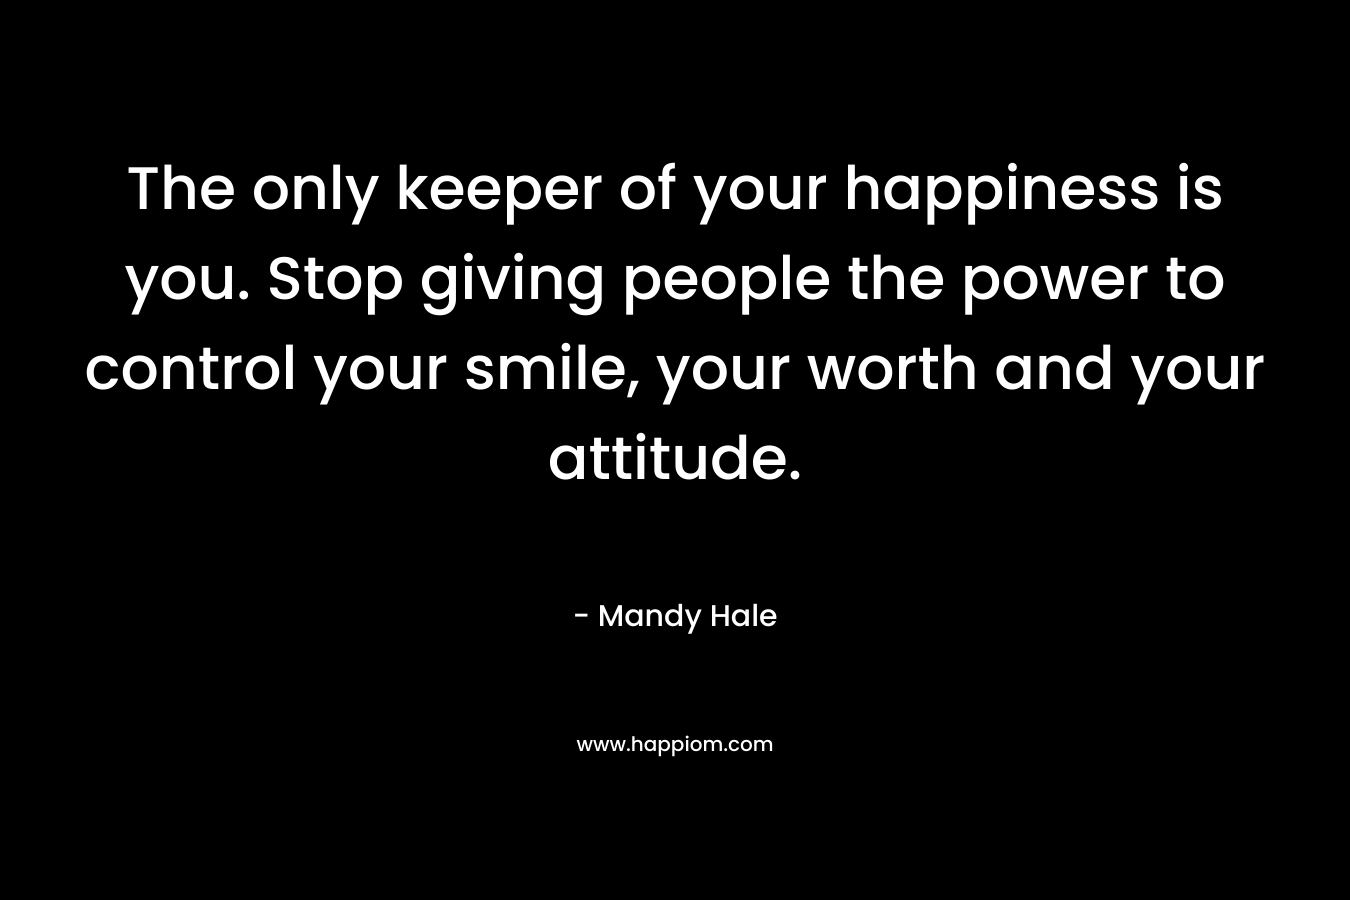 The only keeper of your happiness is you. Stop giving people the power to control your smile, your worth and your attitude. – Mandy Hale